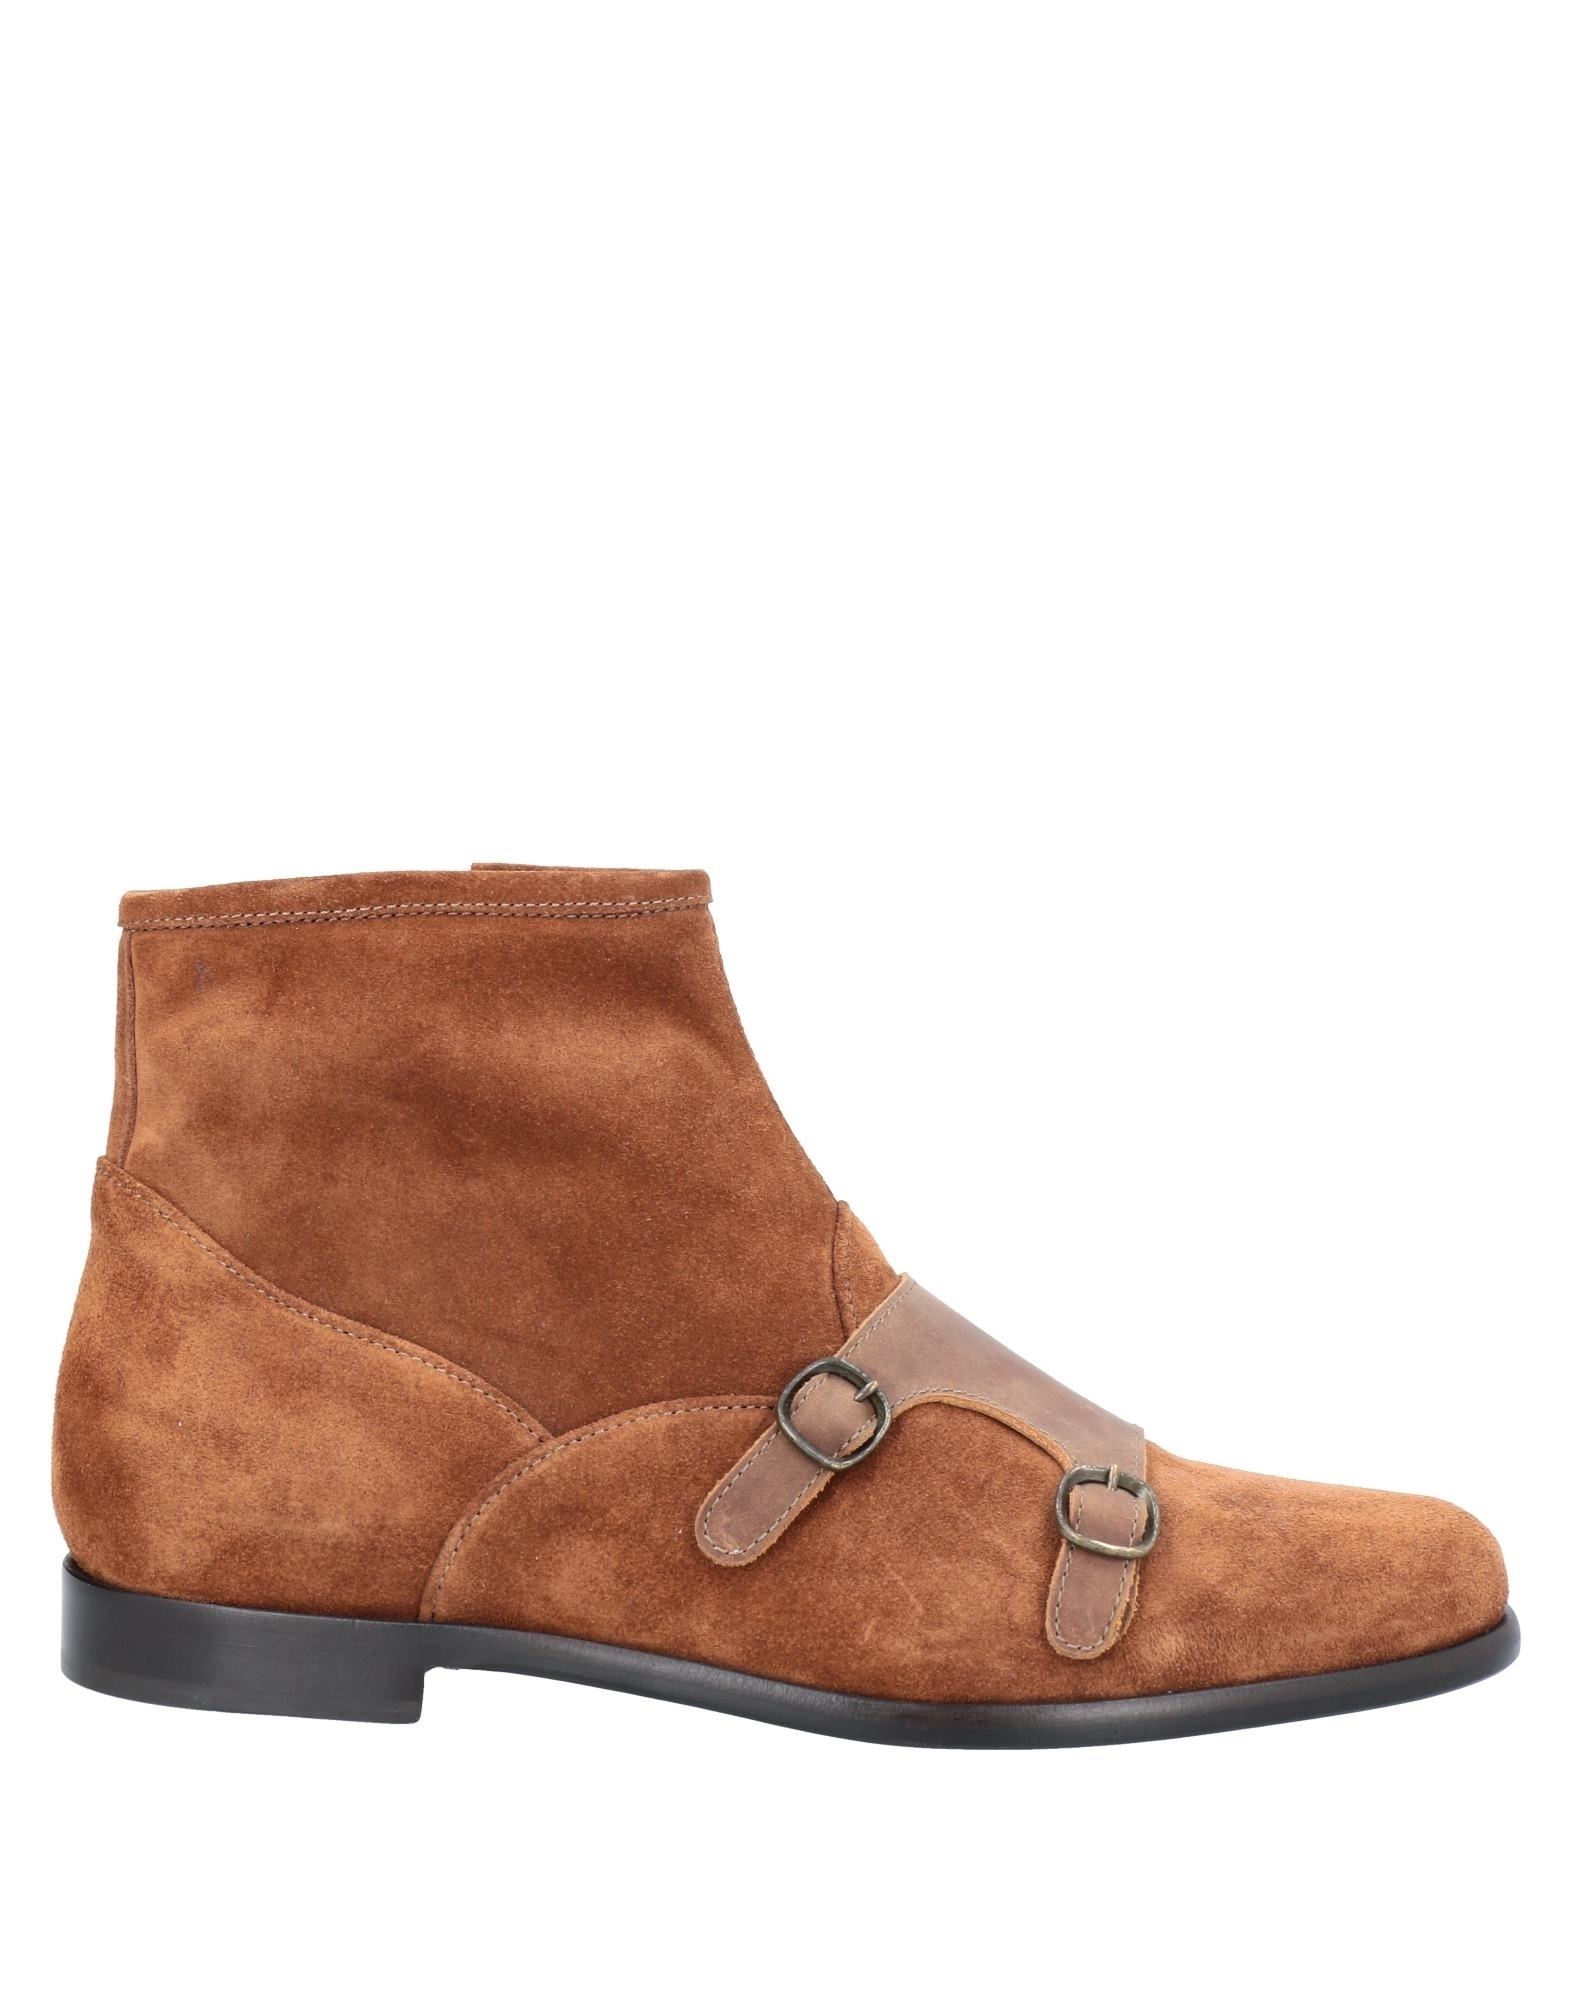 Unconventional Royal Ankle Boots In Tan